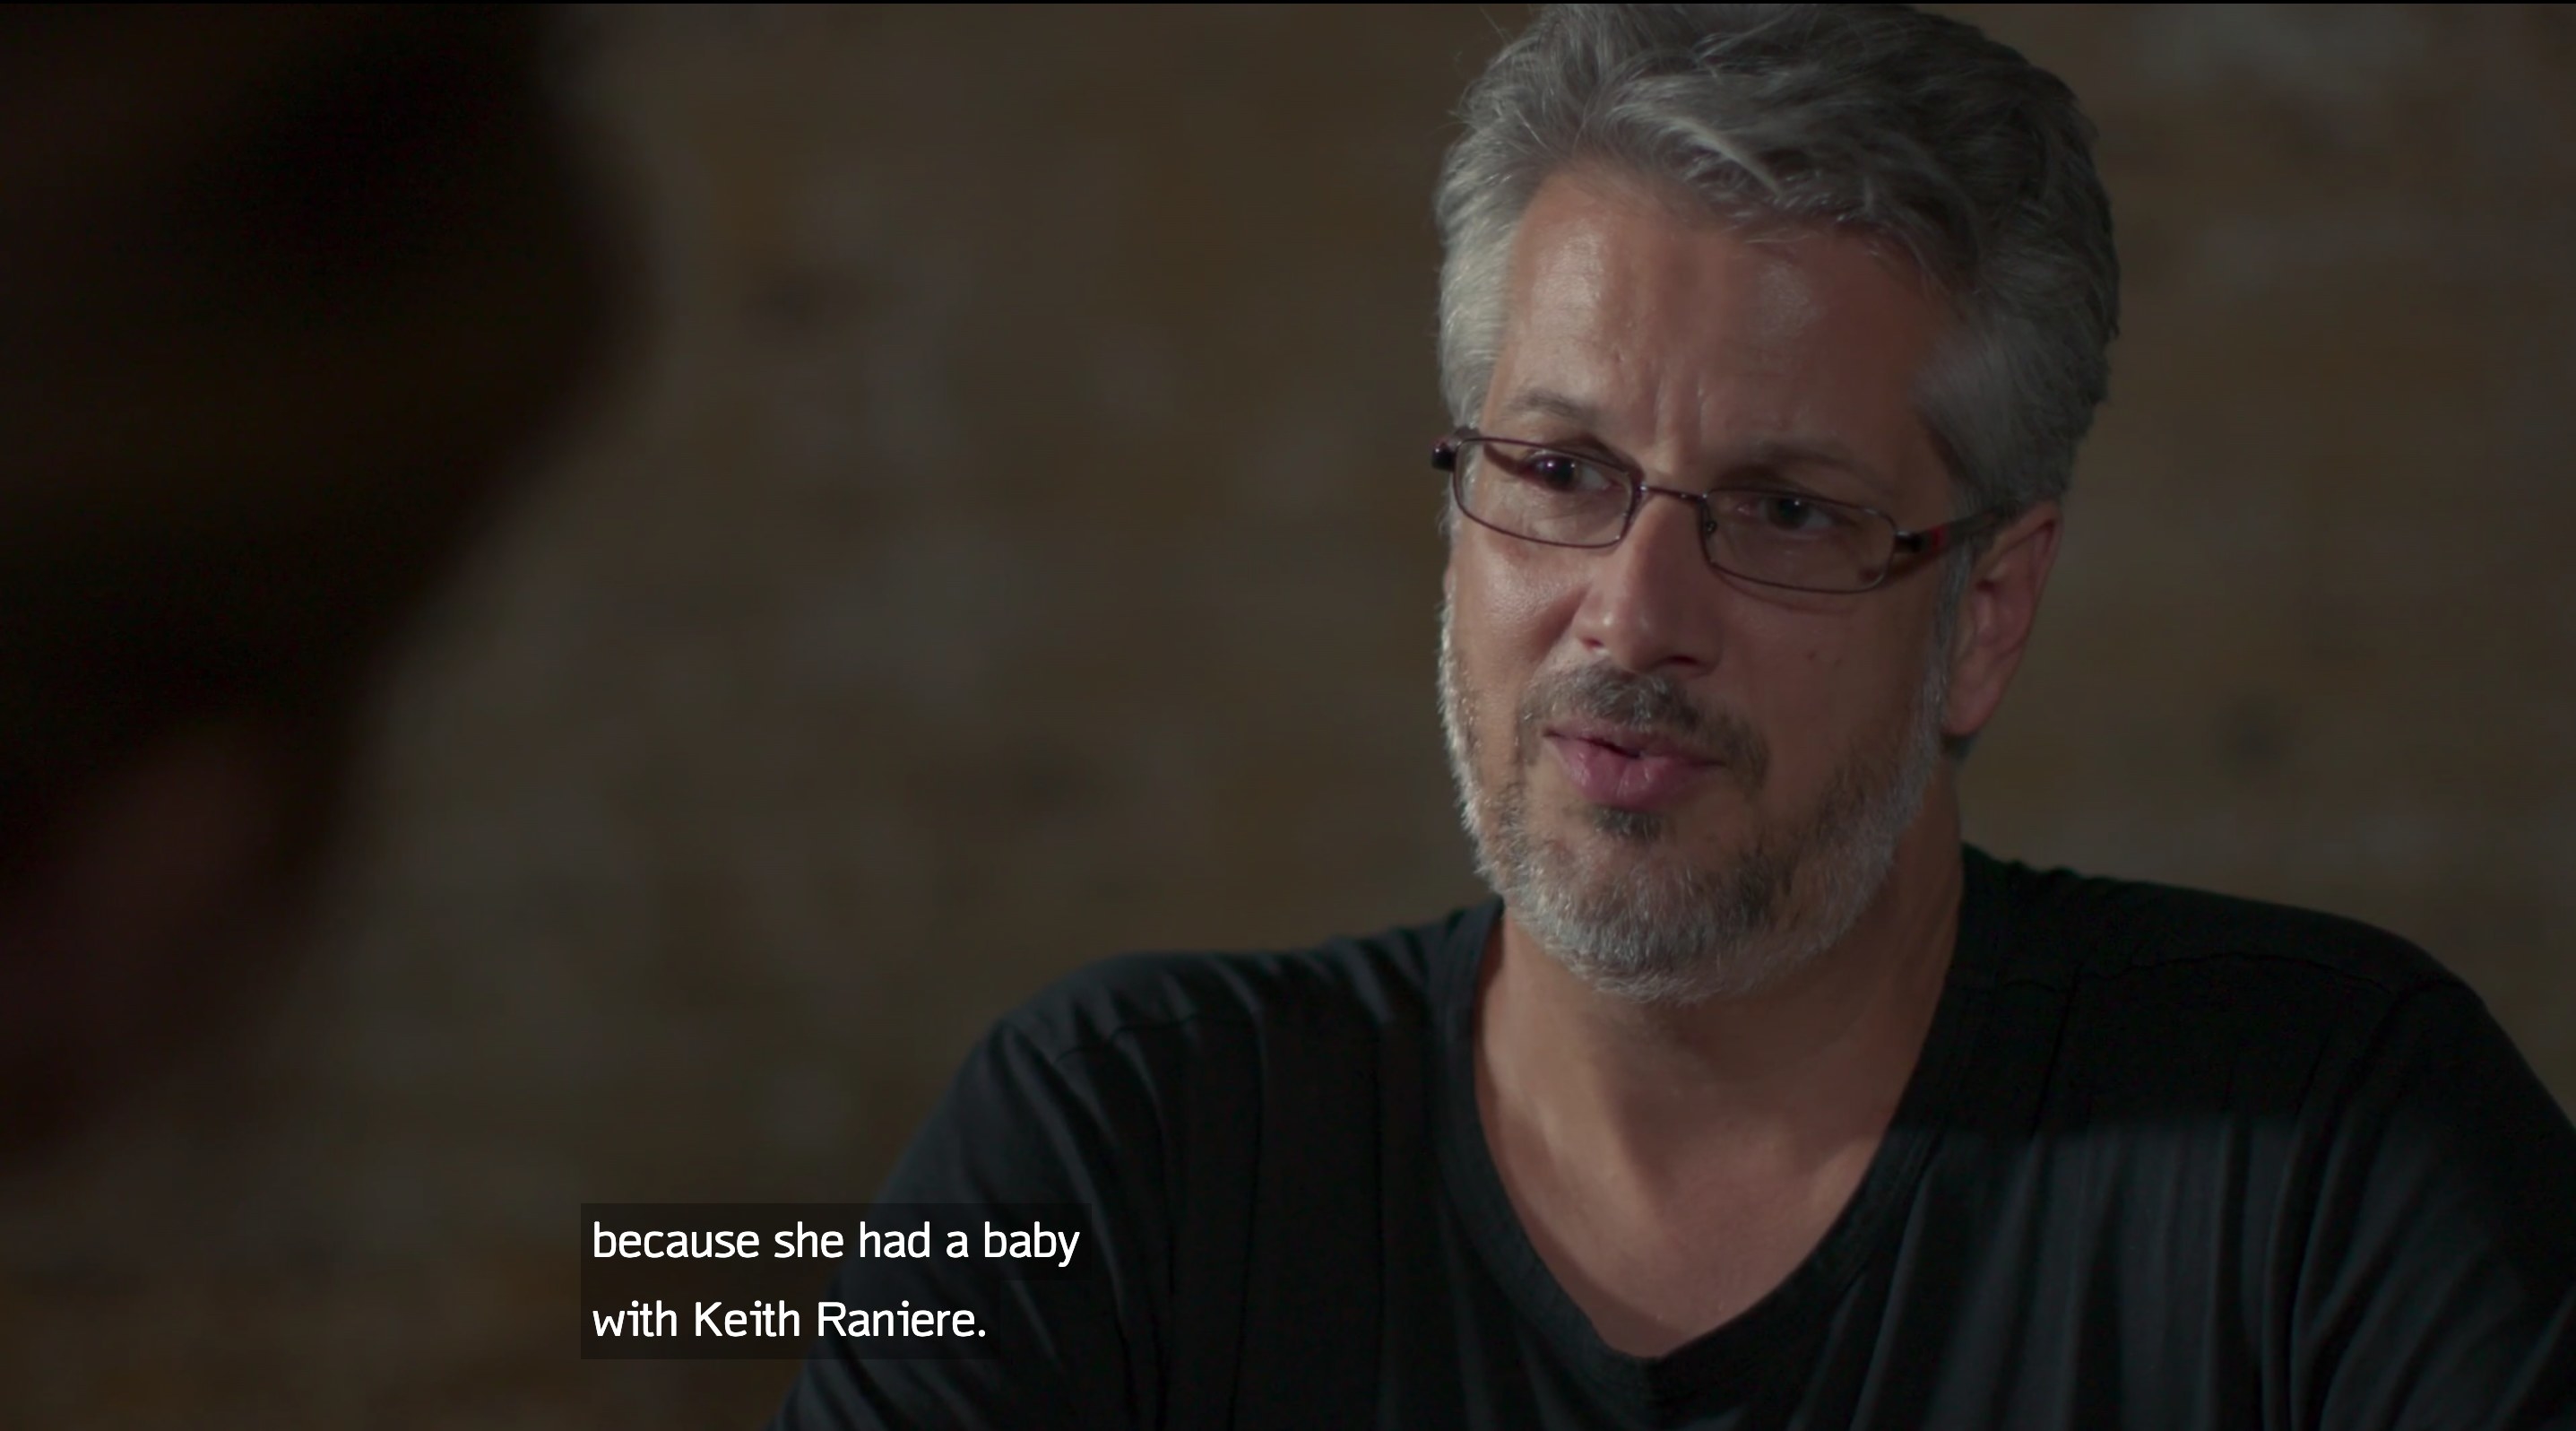 A man being interviewed with the caption text &quot;because she had a baby with Keith Raniere&quot;